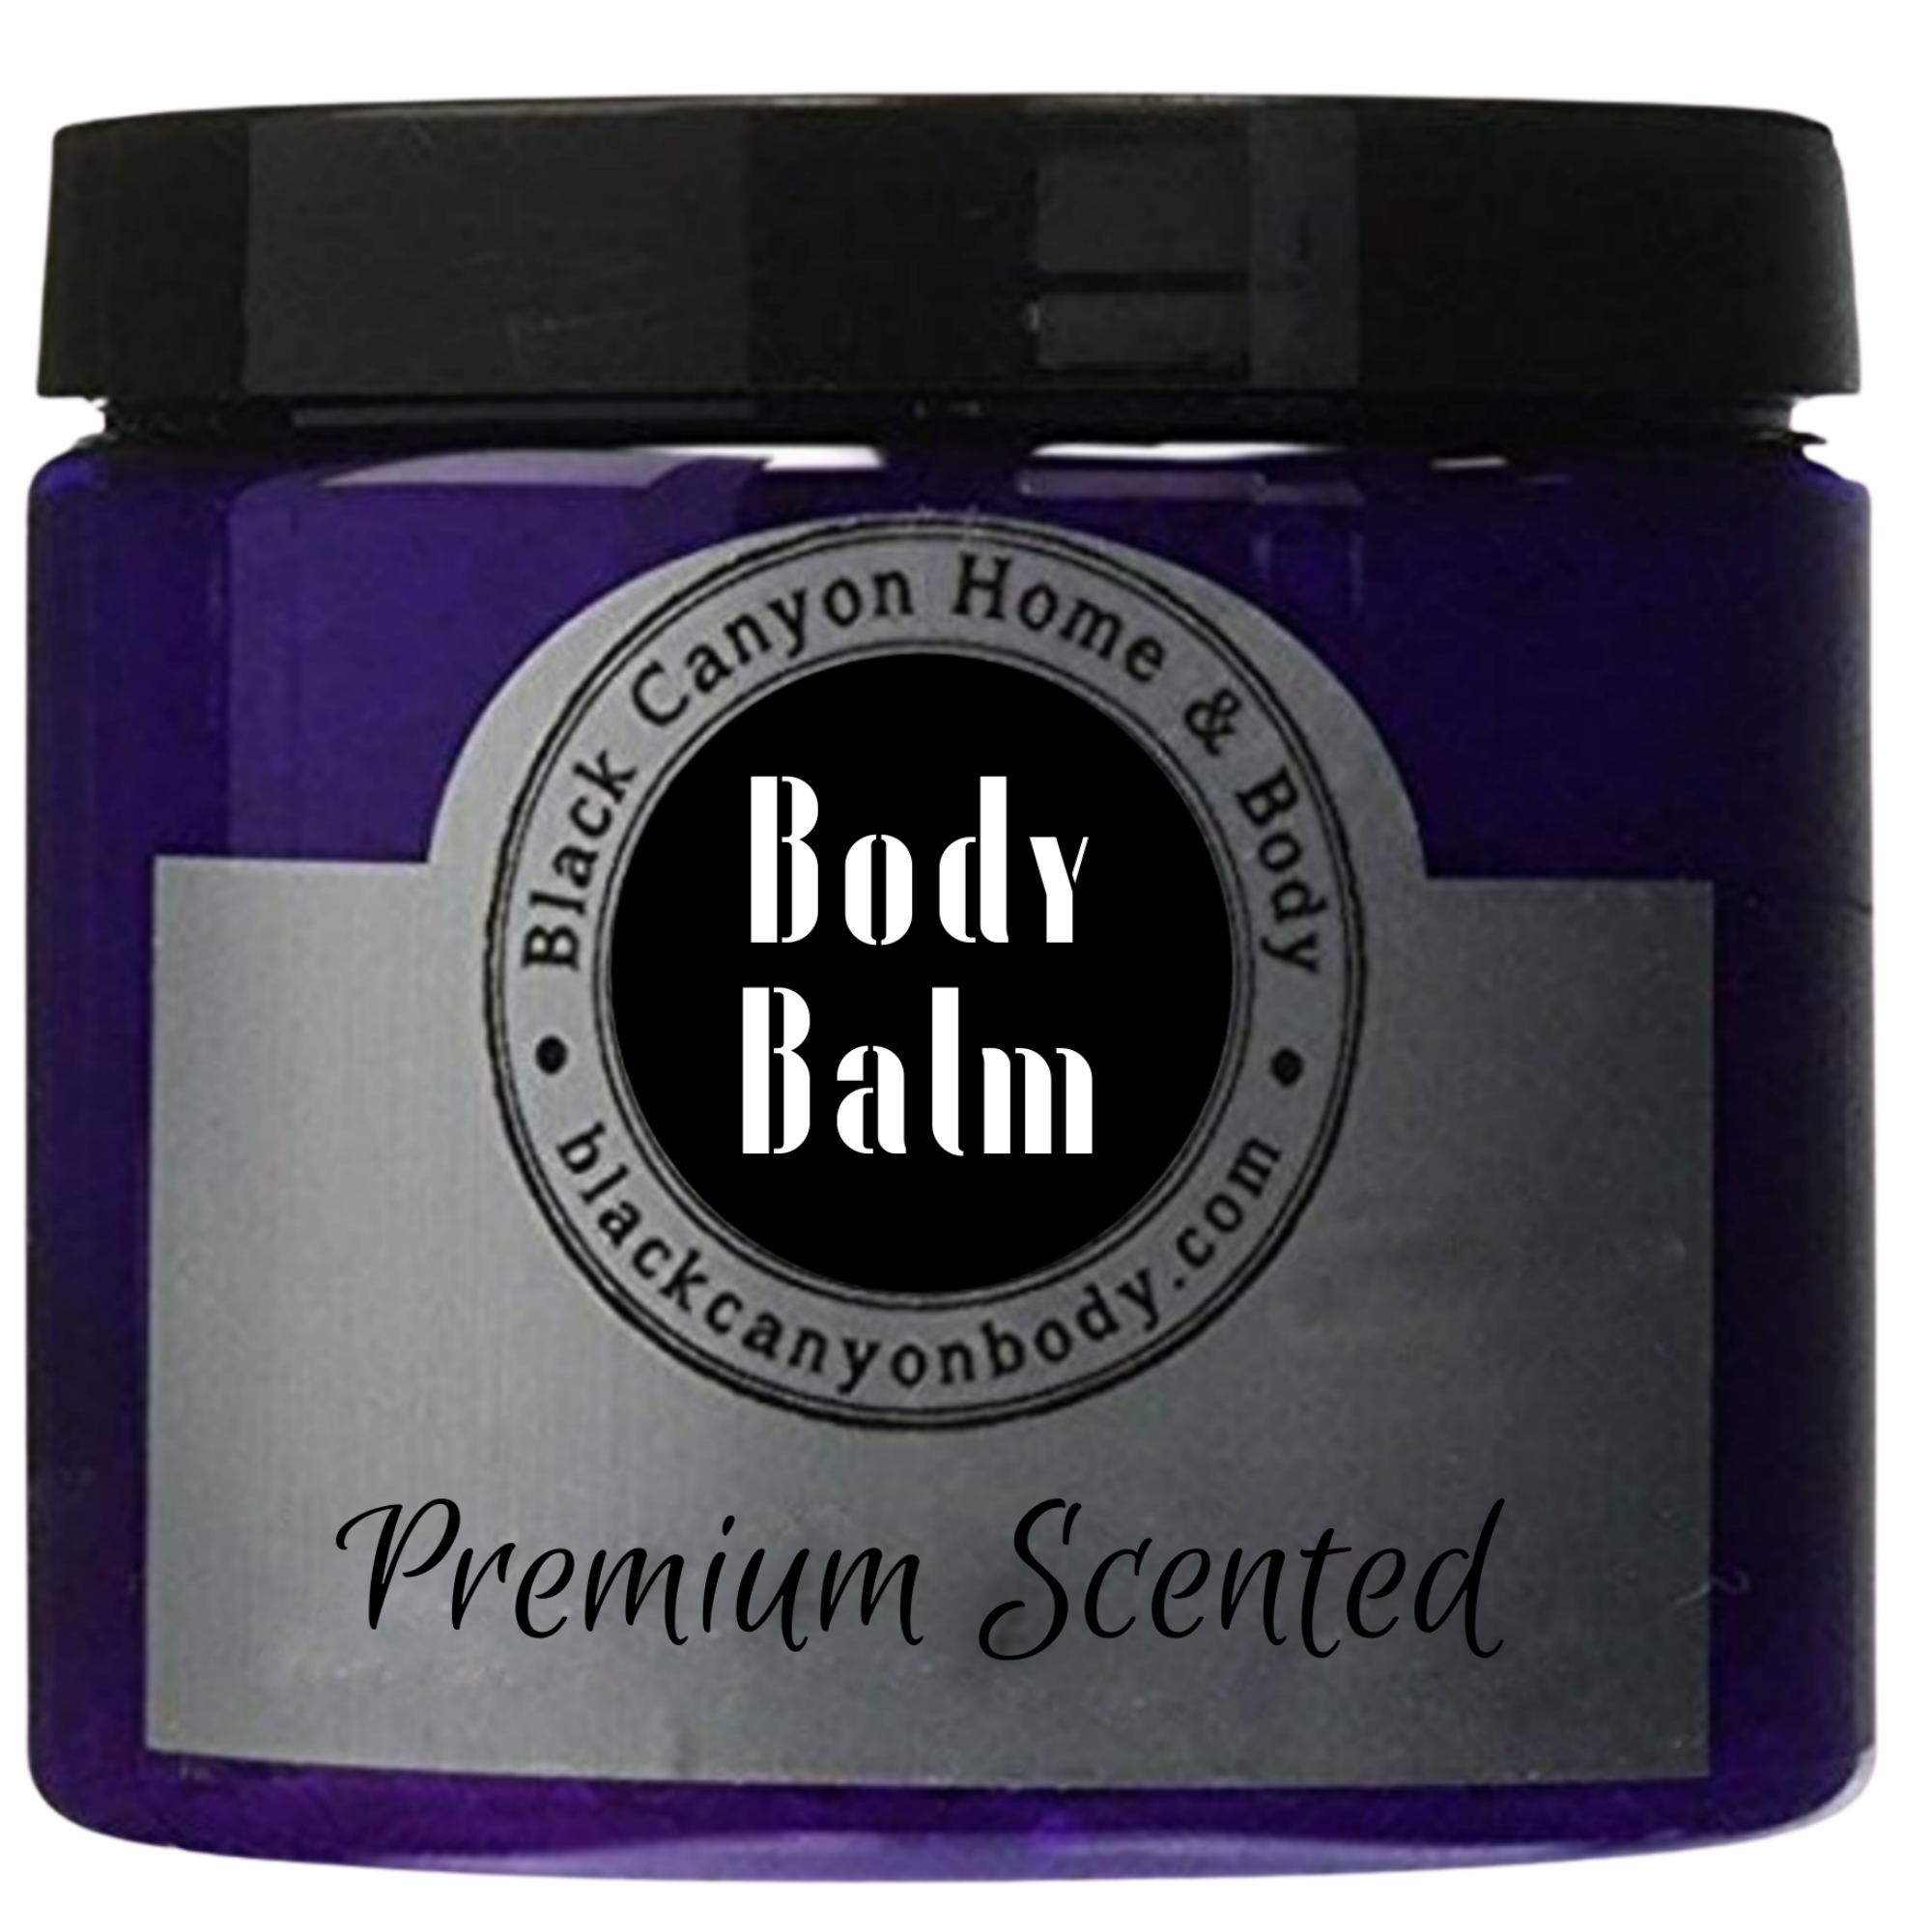 Black Canyon Berry & Orange Blossom Scented Natural Body Balm with Shea